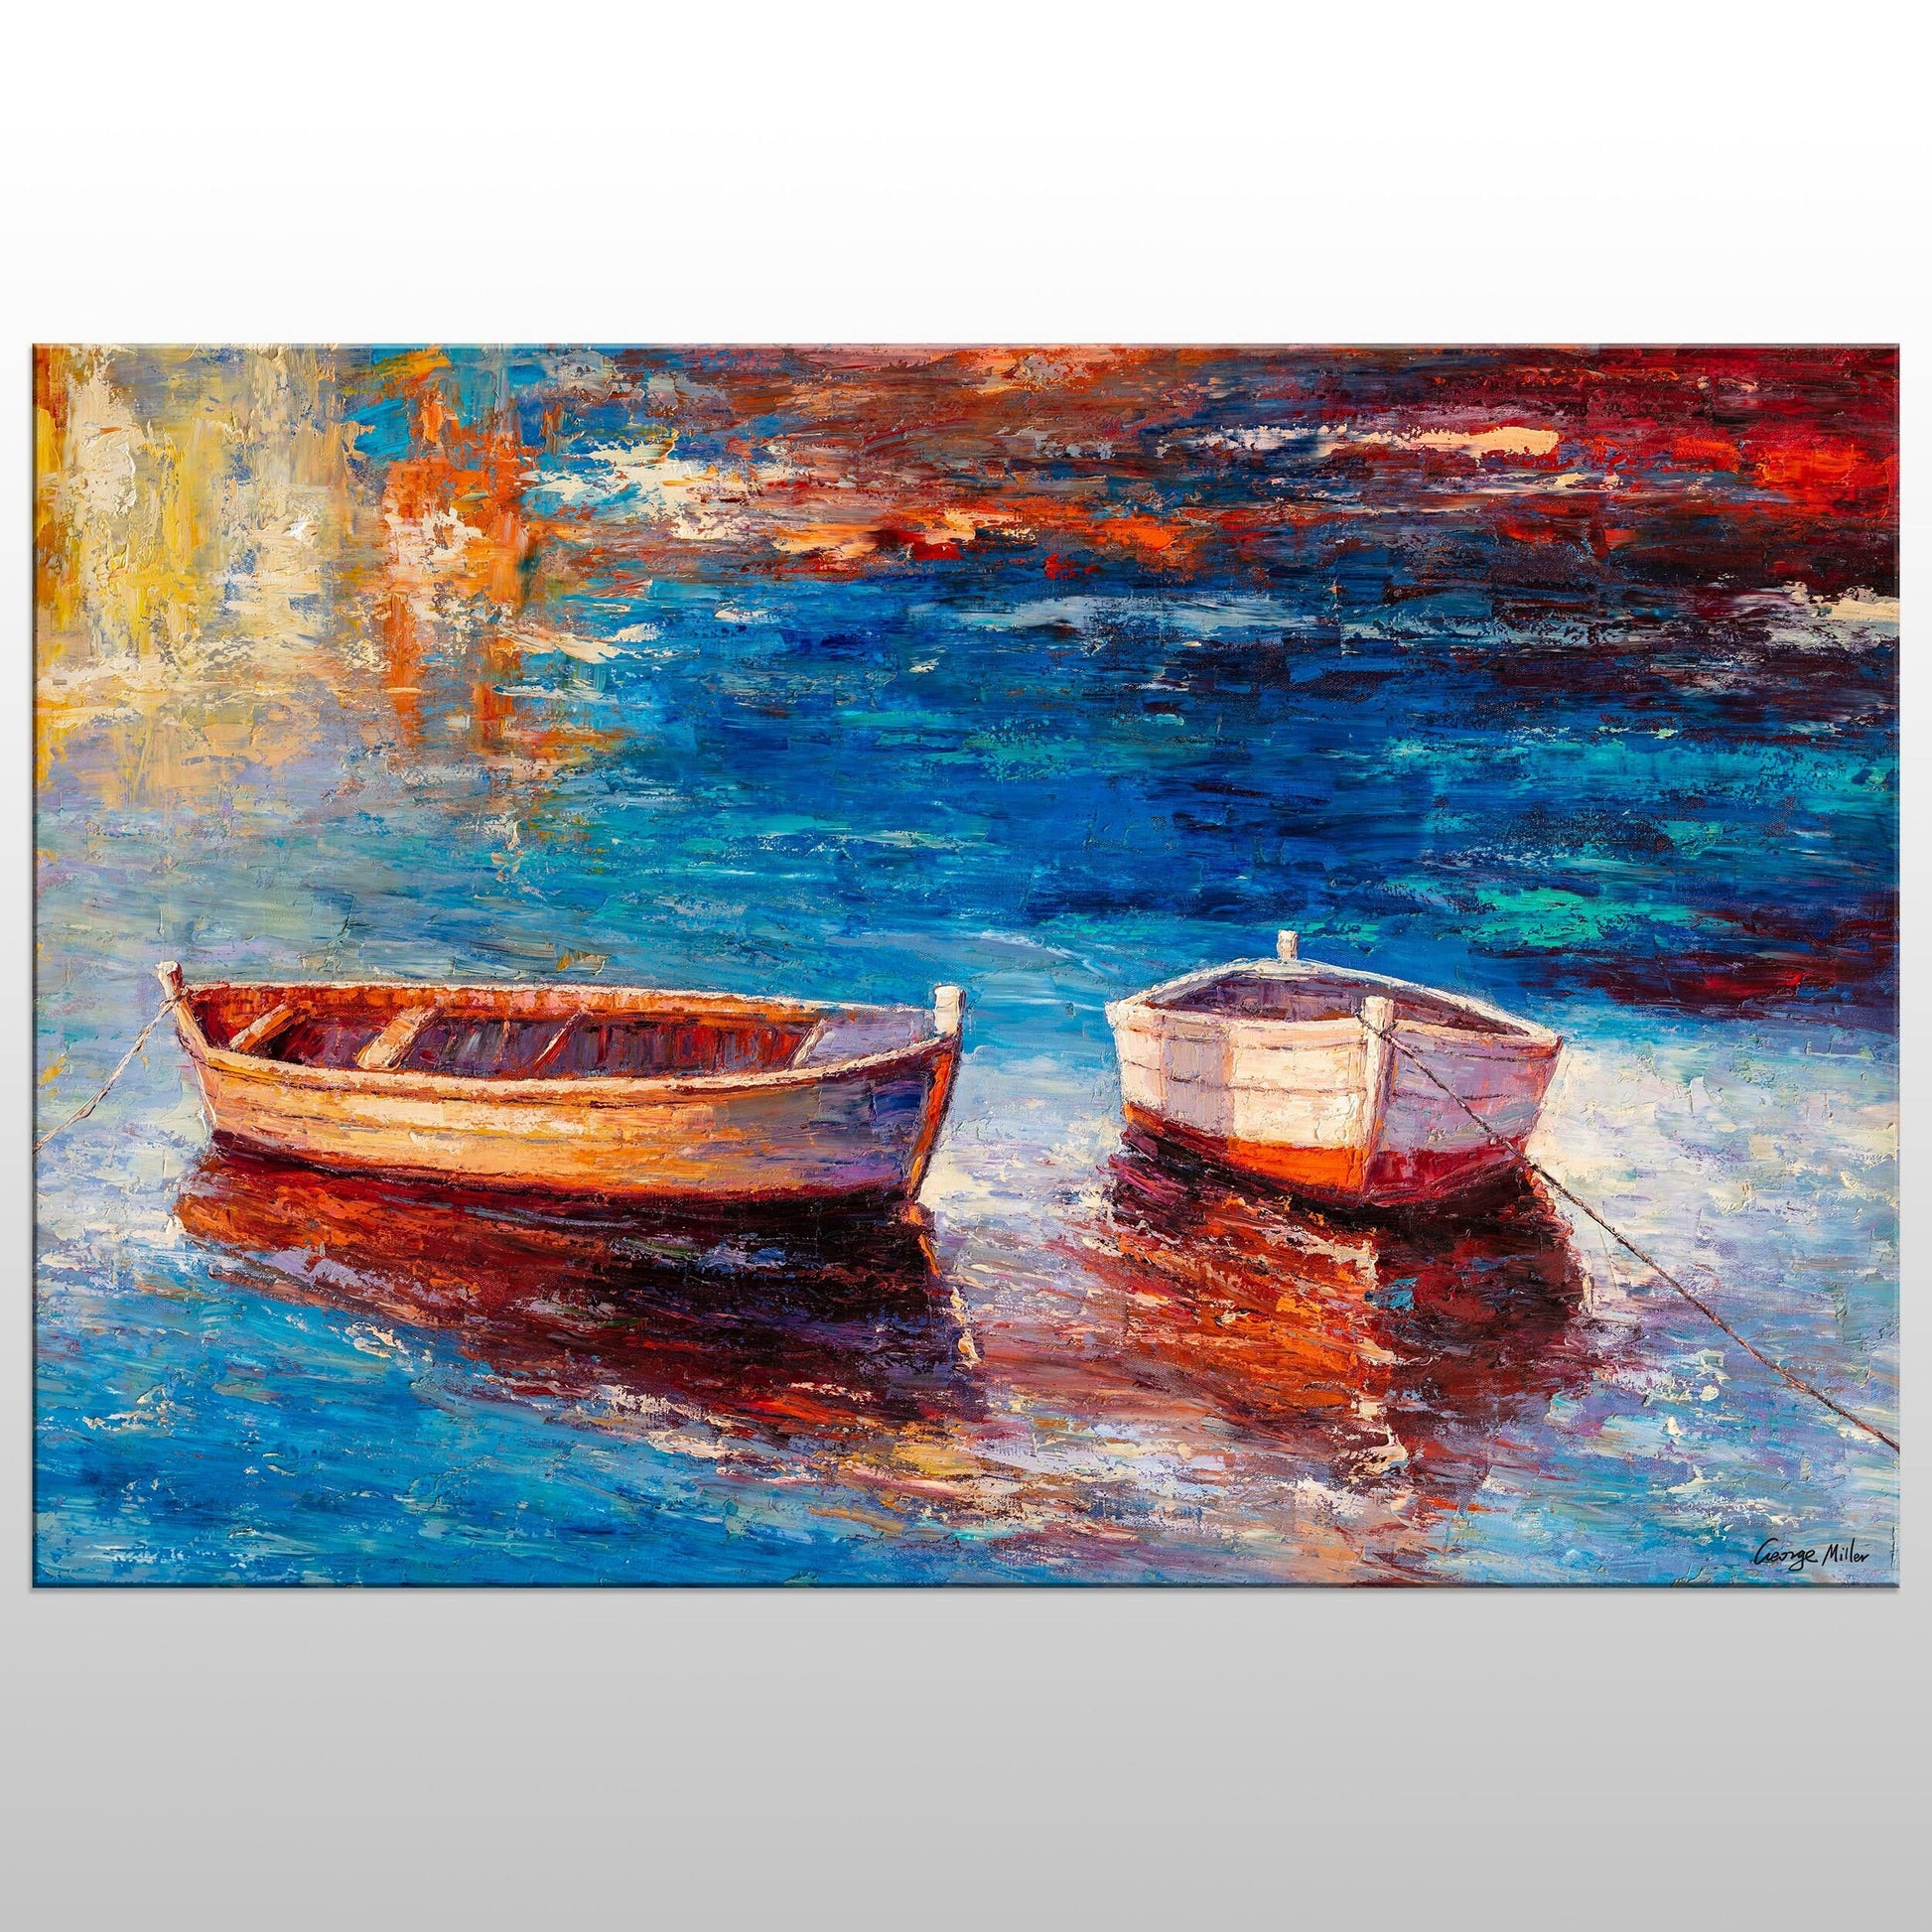 Large Oil Painting Fishing Boats, Large Wall Art Painting, Living Room Wall Art, Contemporary Art, Original Oil Painting Seascape, Original